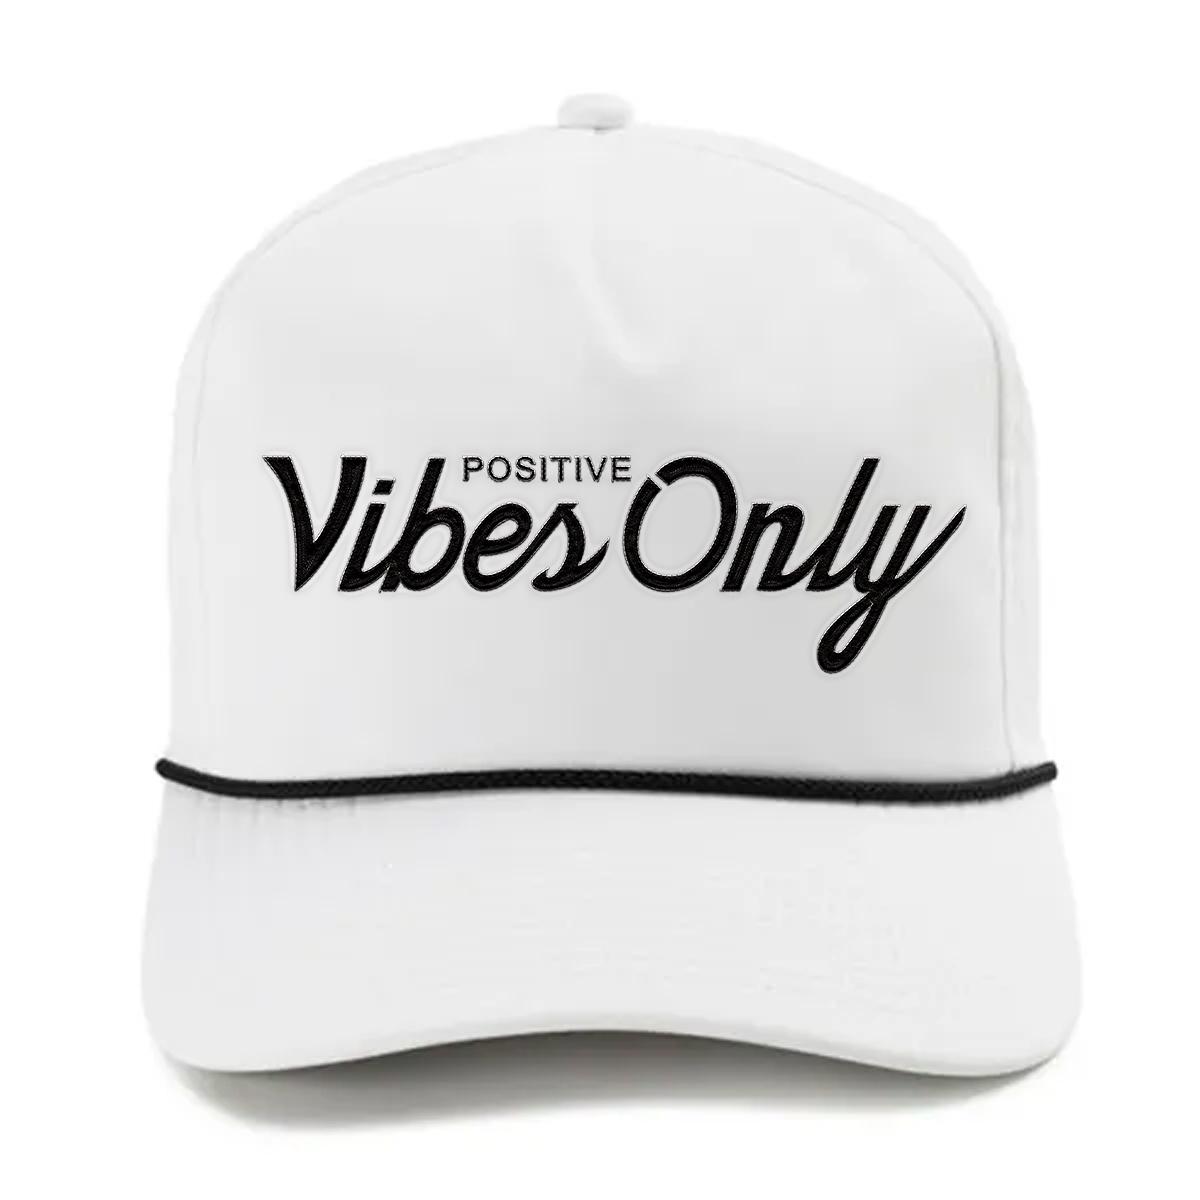 Positive Vibes Only Imperial Rope Hat-Hats-Barstool Sports-White/Black-One Size-Barstool Sports